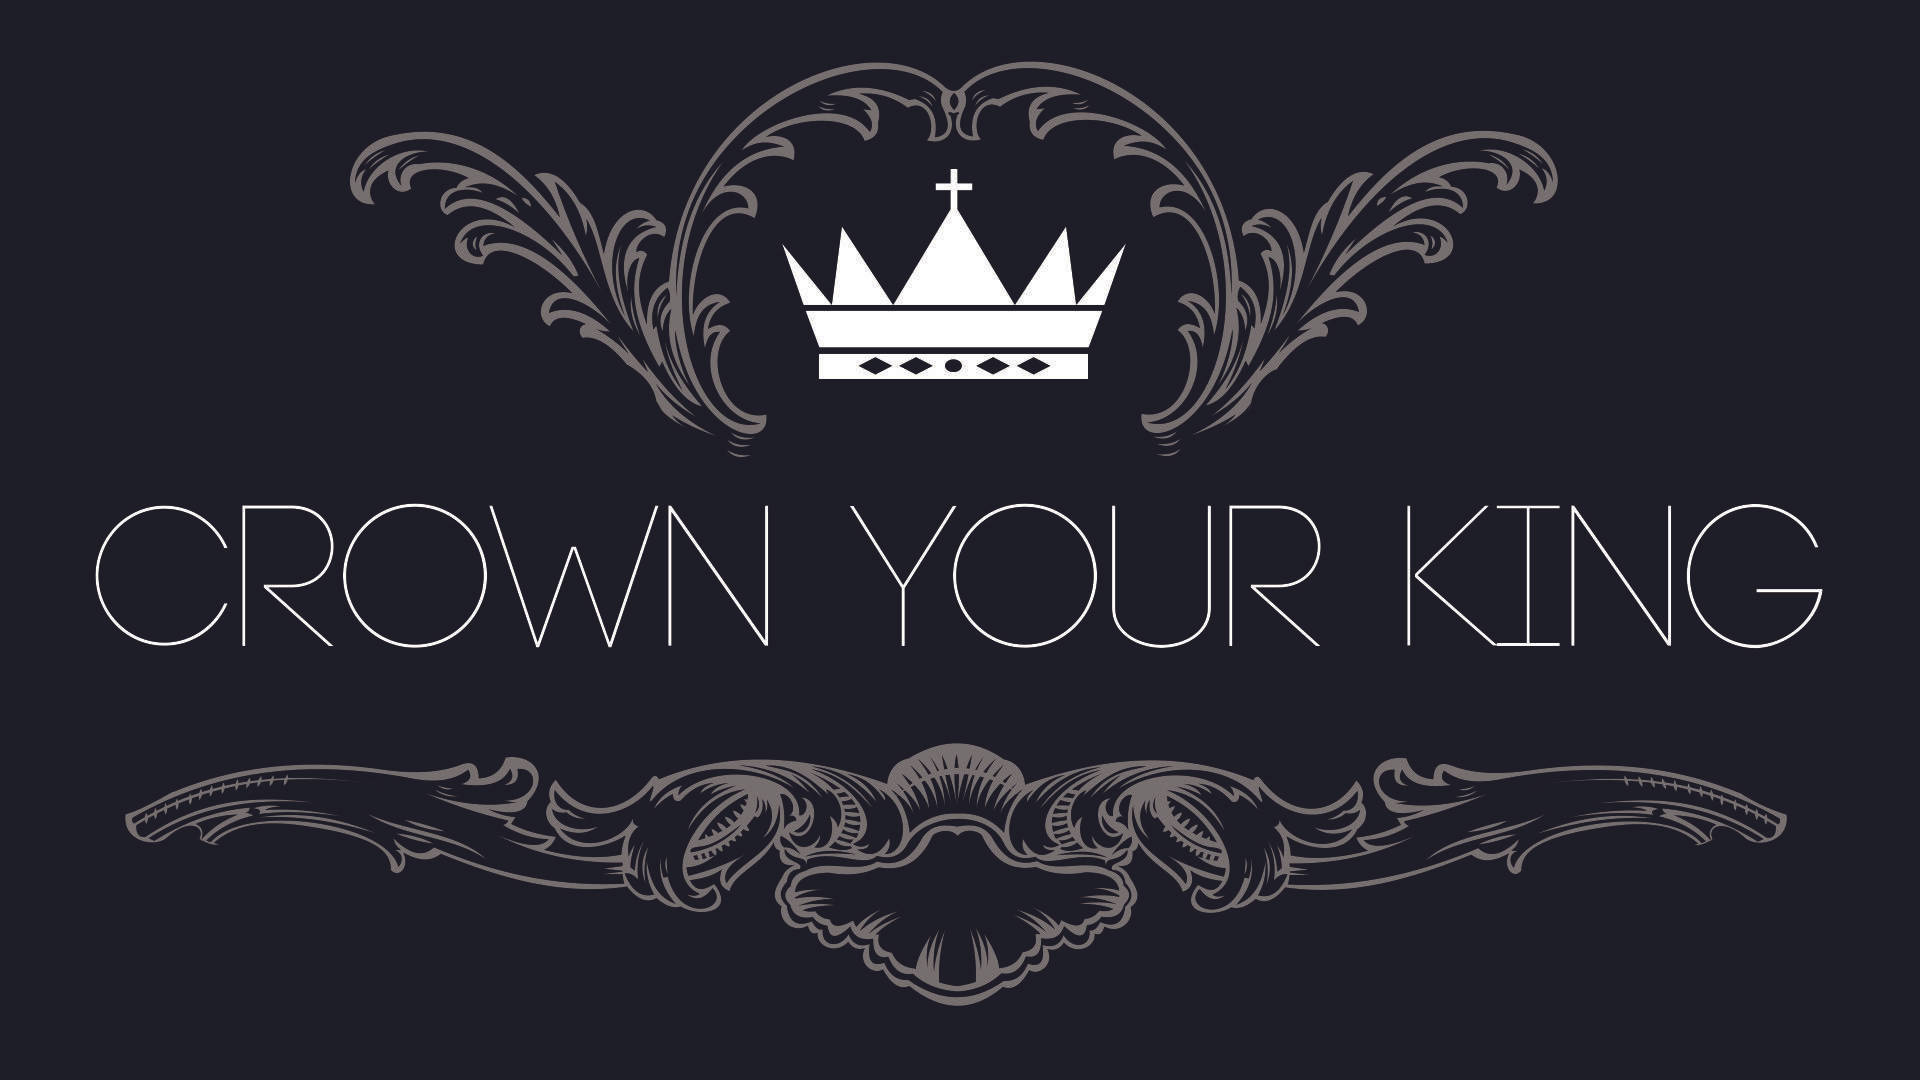 The Black Crown of Power. Wallpaper